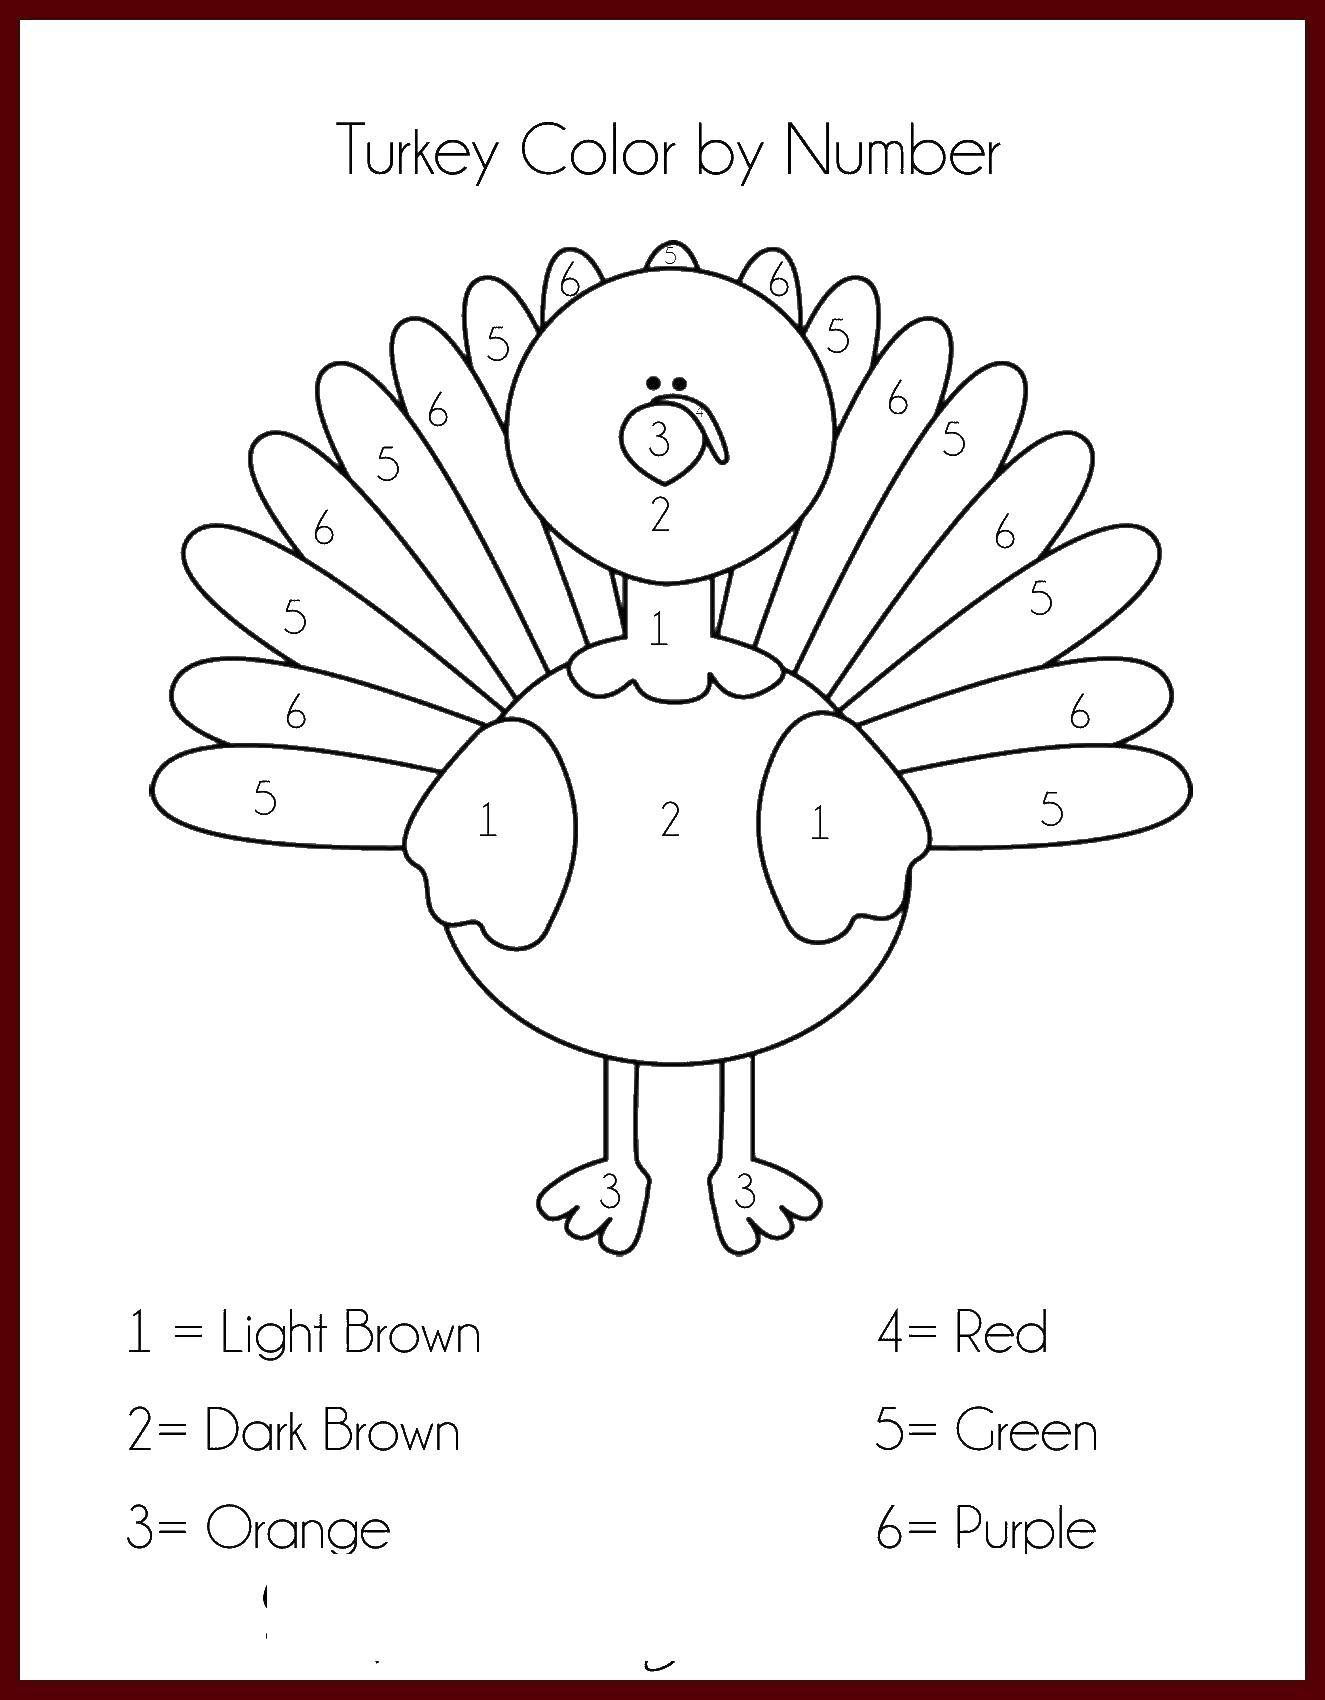 Coloring Turkey coloring. Category coloring by numbers. Tags:  Turkey, bird, numbers, colors.